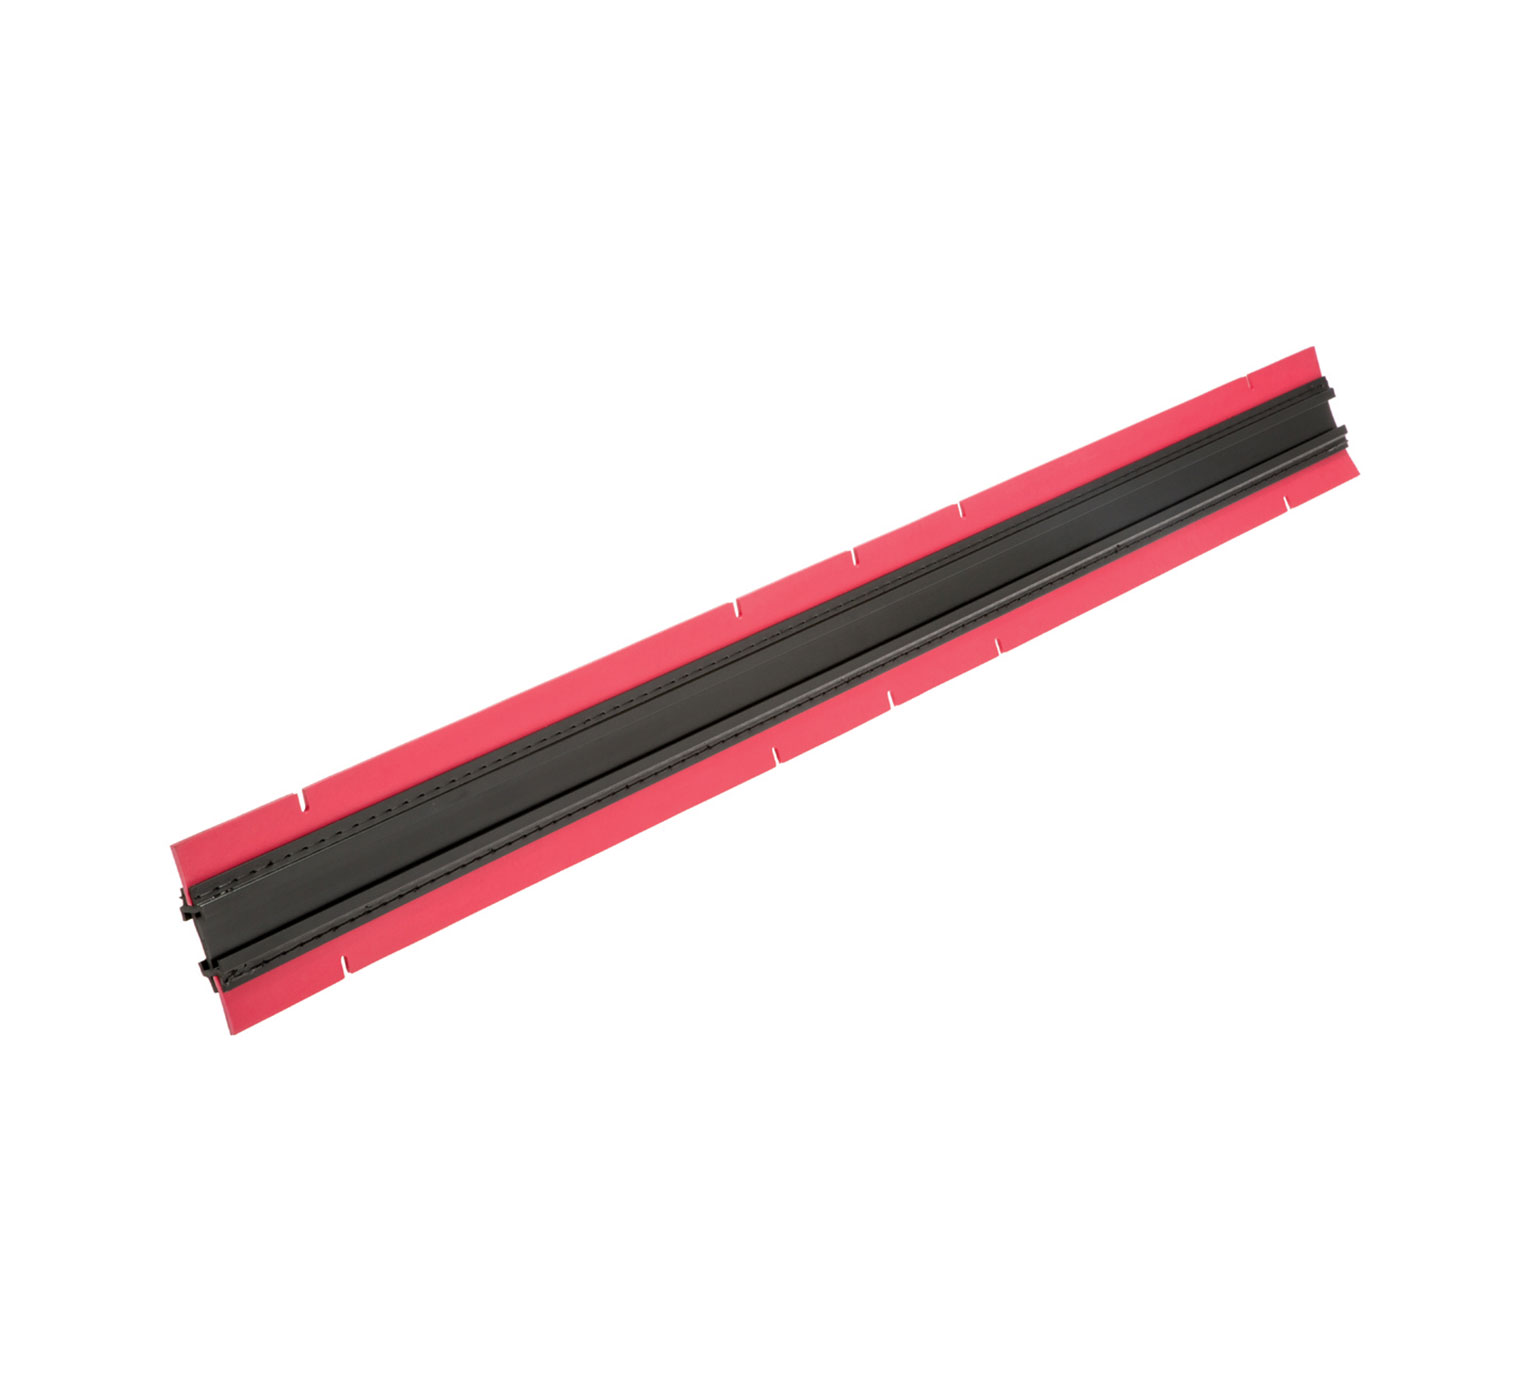 10991 Linard Front Squeegee &#8211; 45 in alt 1